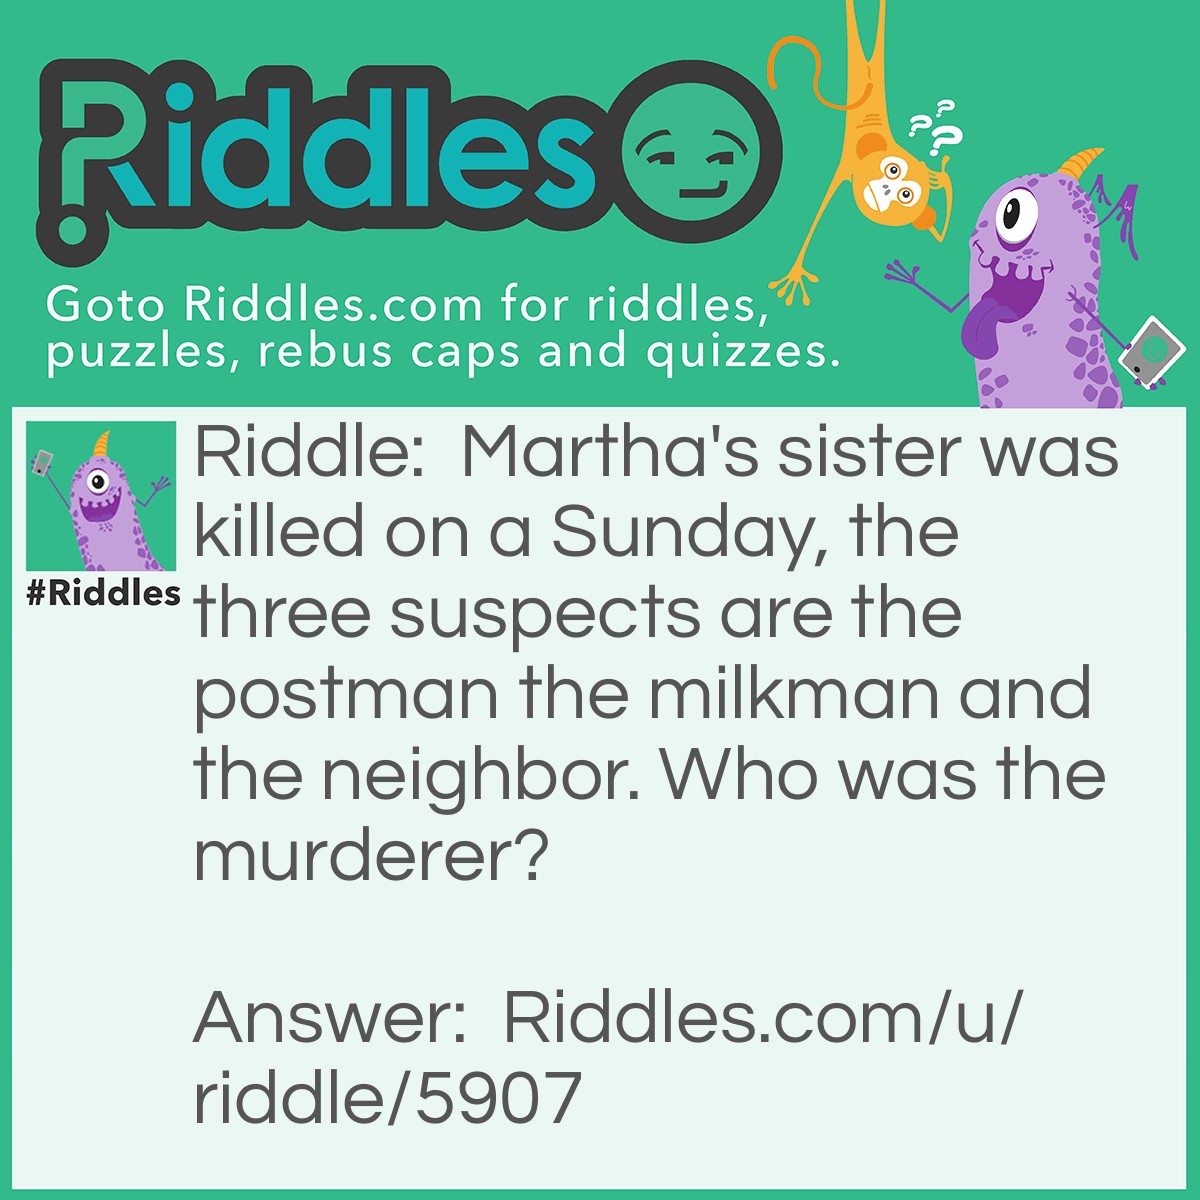 Riddle: Martha's sister was killed on a Sunday, the three suspects are the postman the milkman and the neighbor. Who was the murderer? Answer: The postman because it was a Sunday.